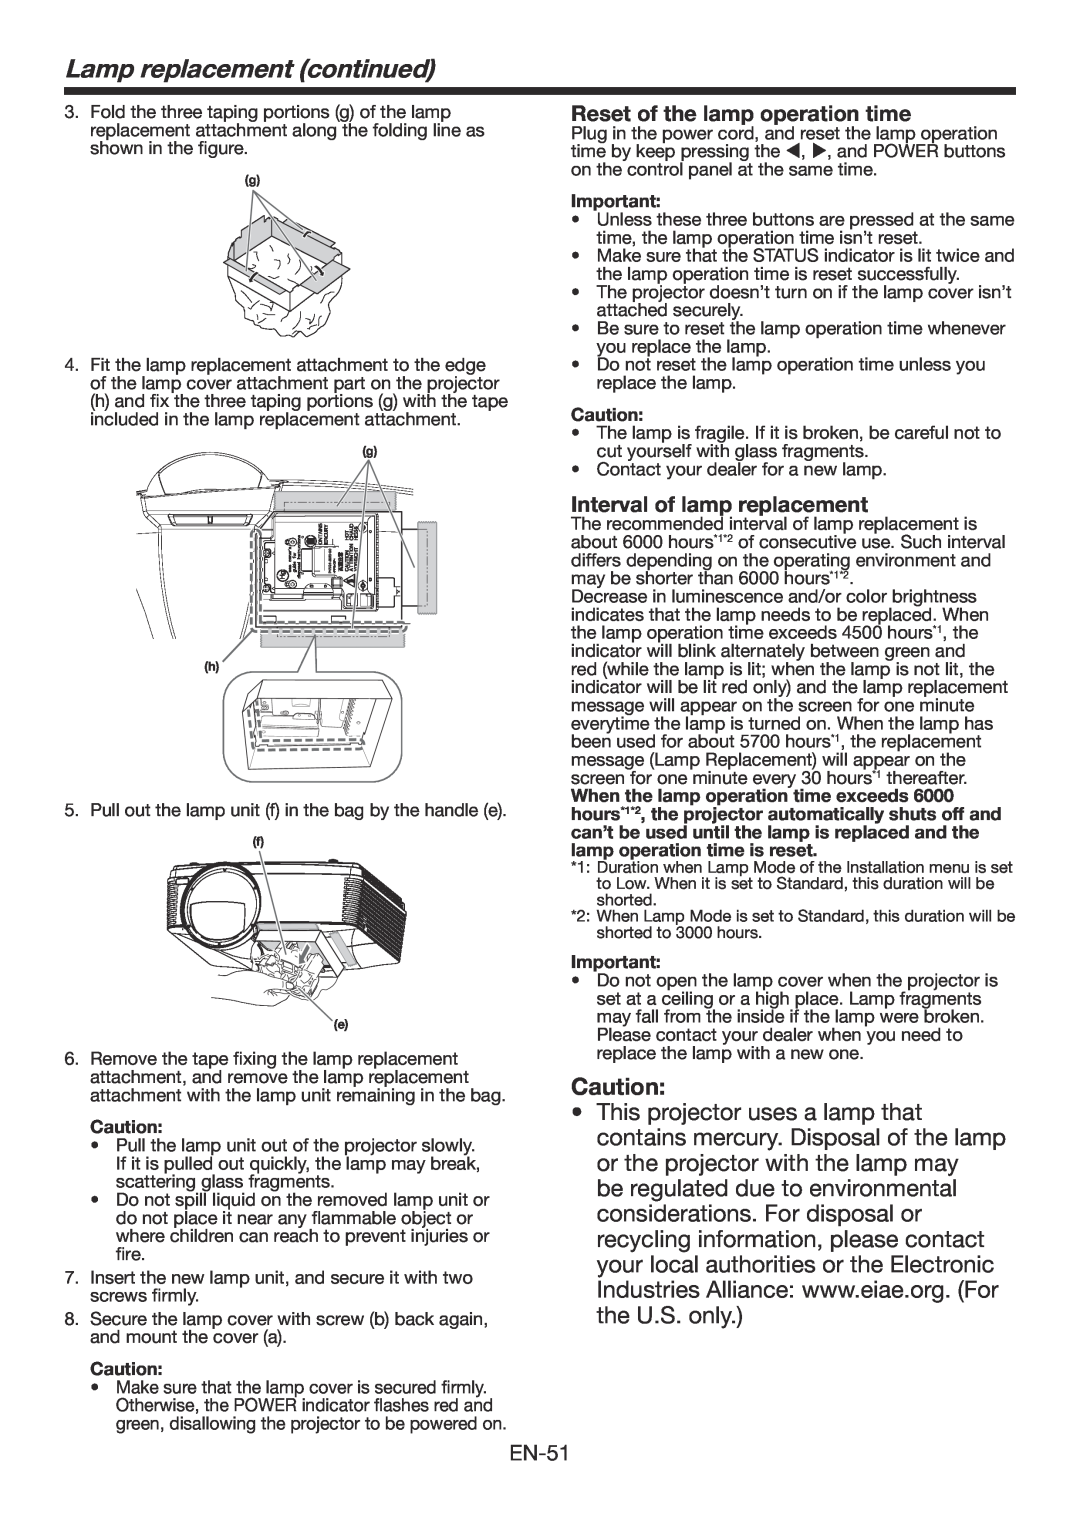 Mitsubishi Electronics WD385U-EST user manual Lamp replacement continued, Reset of the lamp operation time 